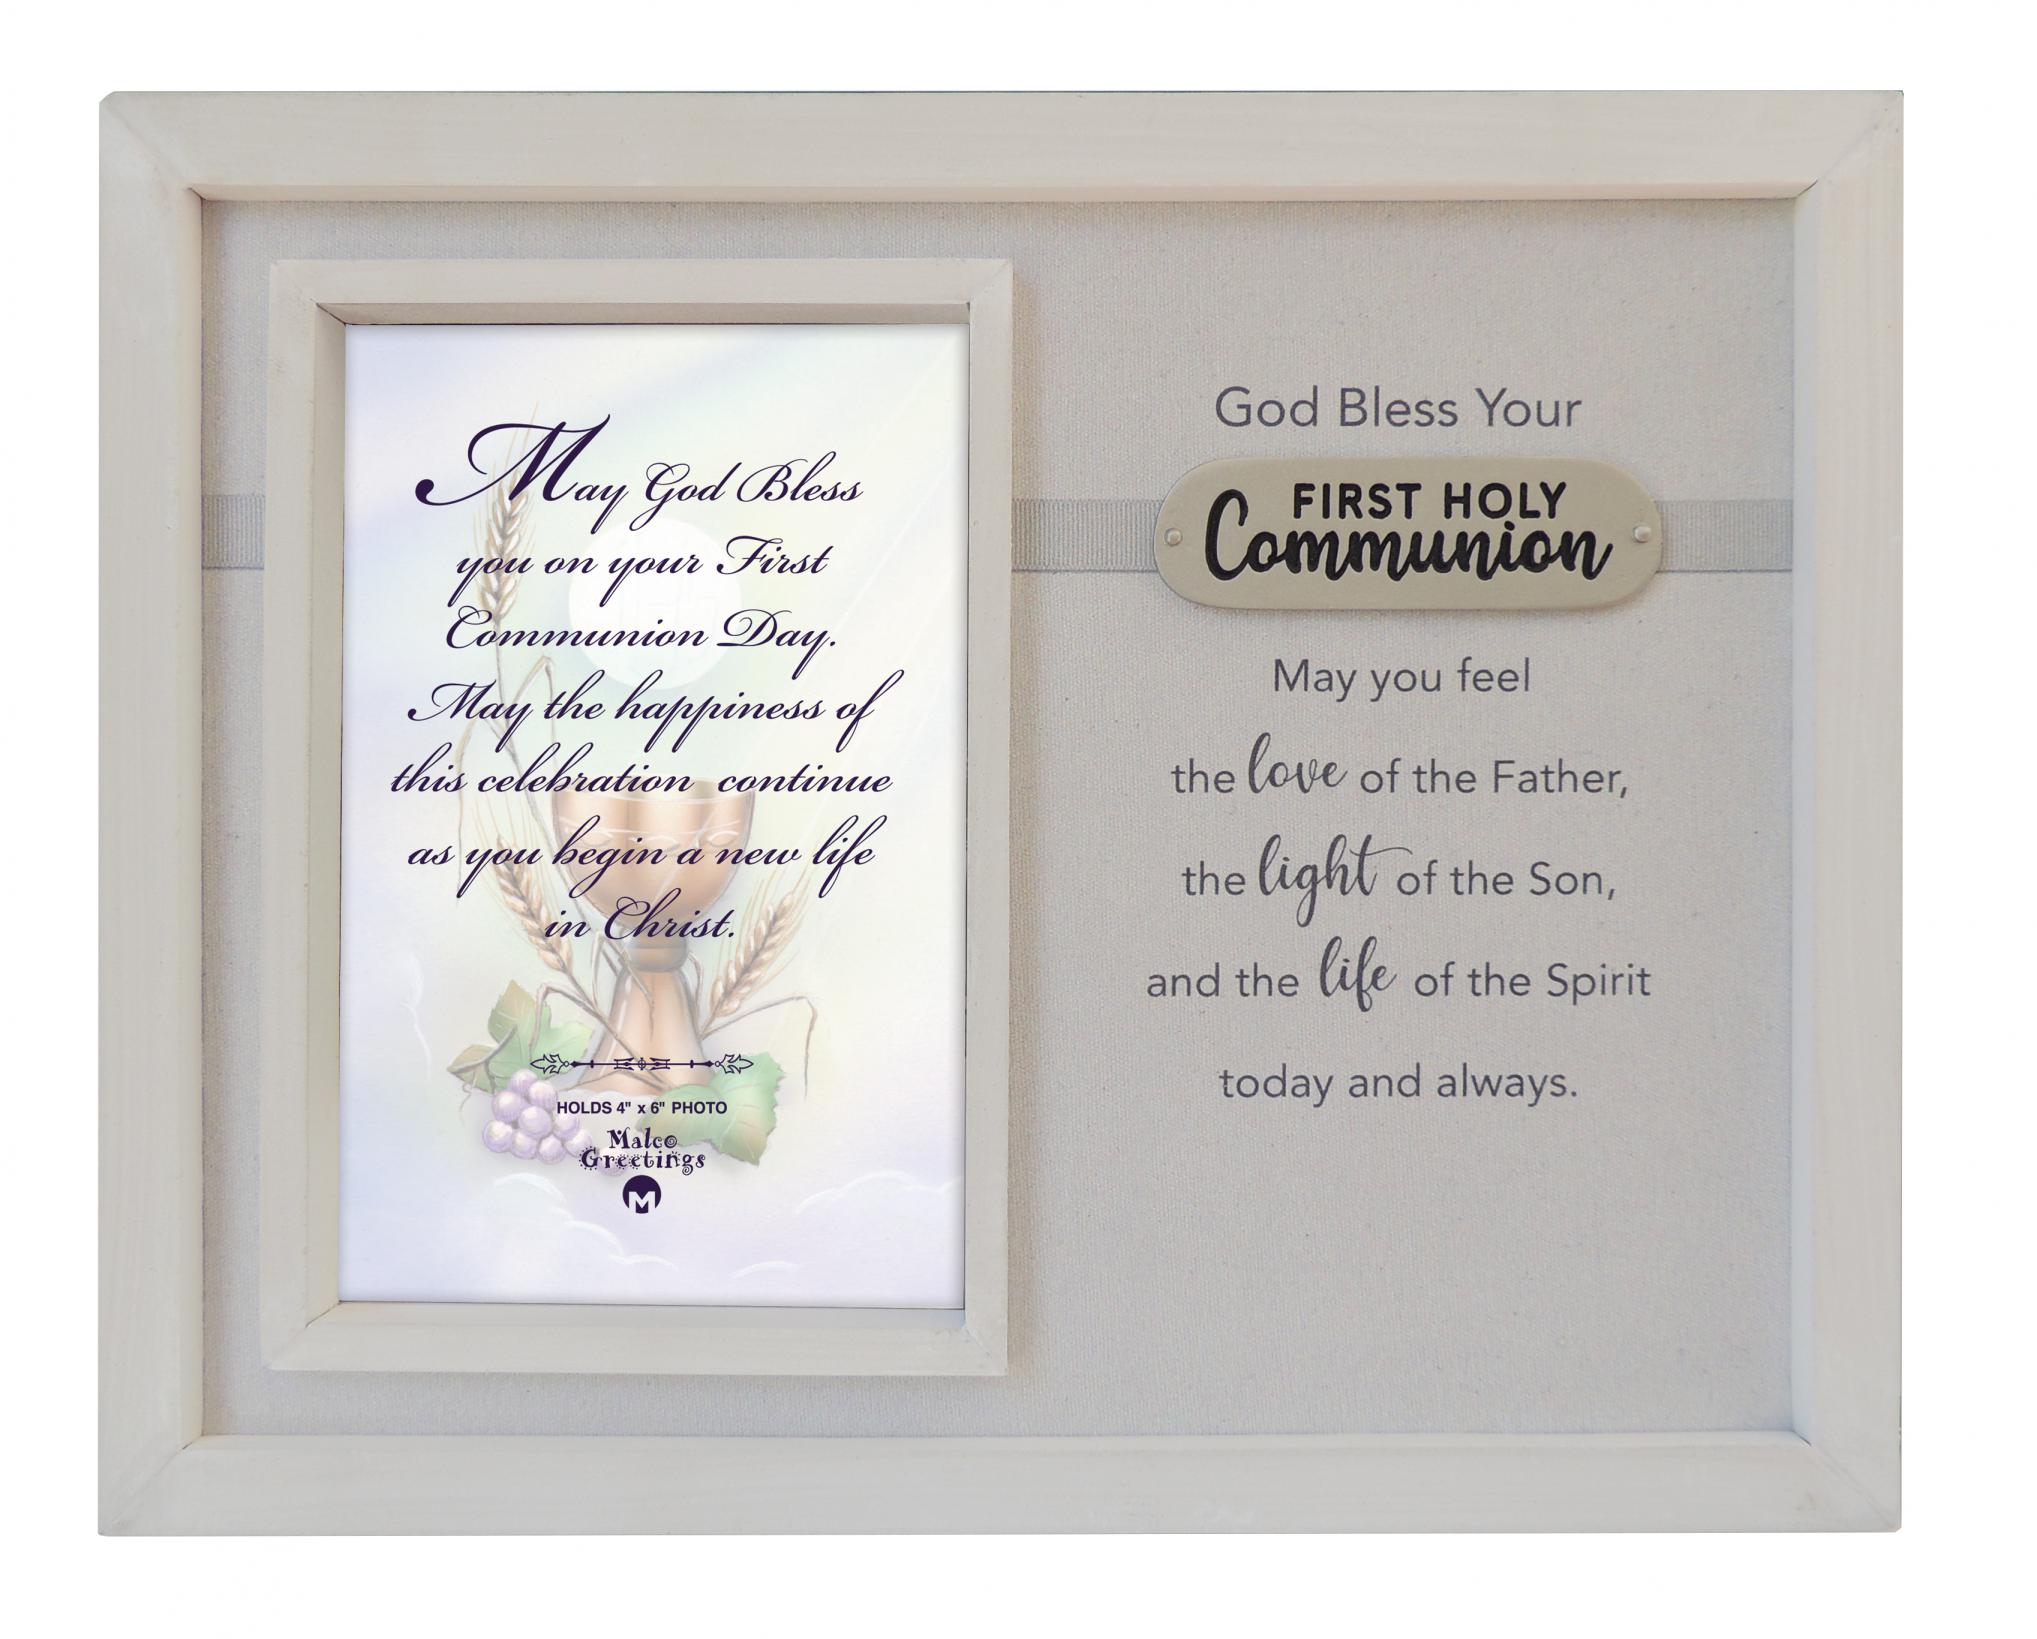 8in x10in Wood First Communion frame w/brass plate can be personalized - hold 4in x6in photo